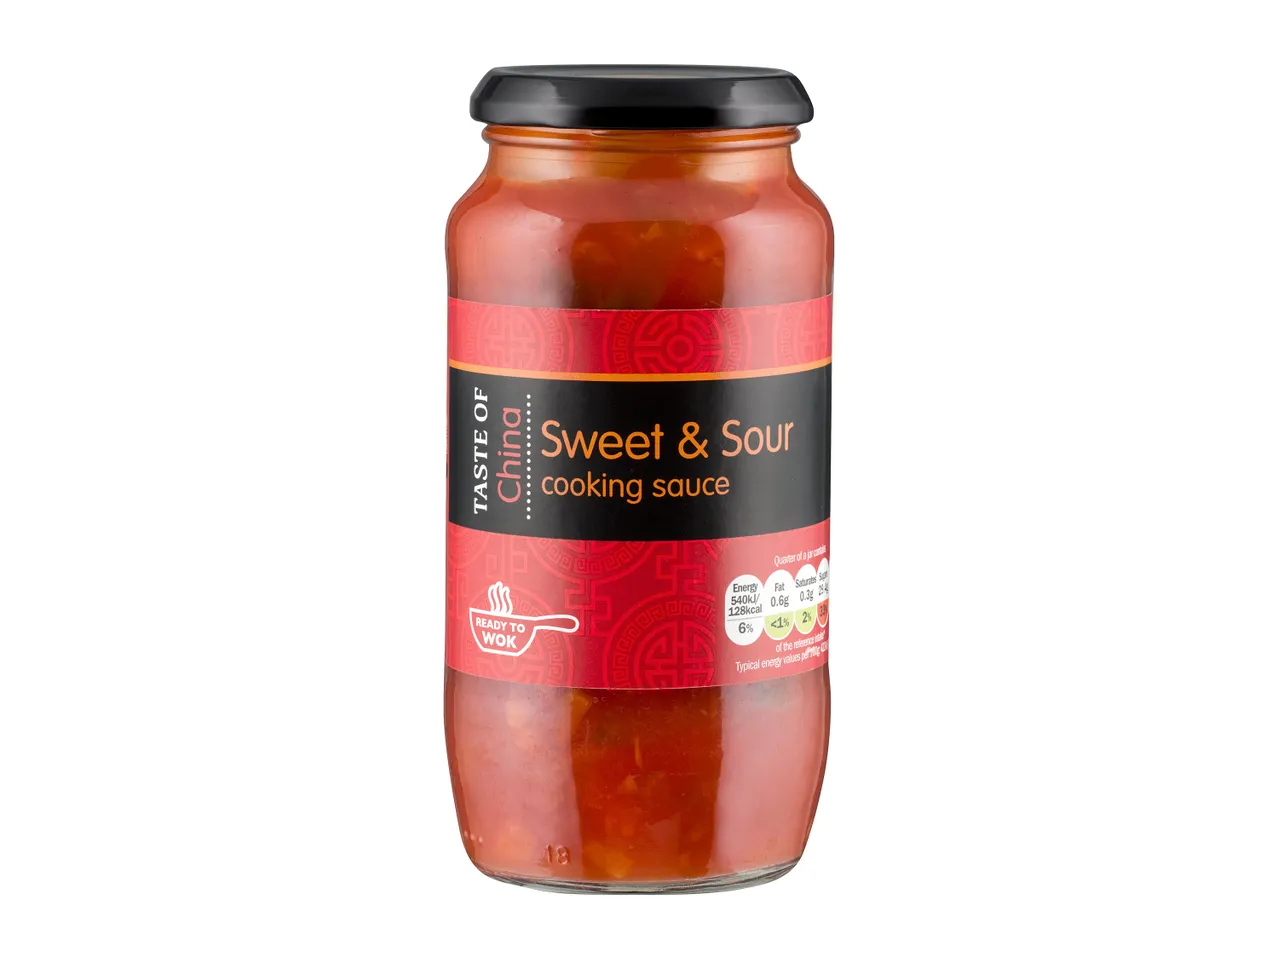 Go to full screen view: Taste Of Sweet & Sour Cooking Sauce - Image 1